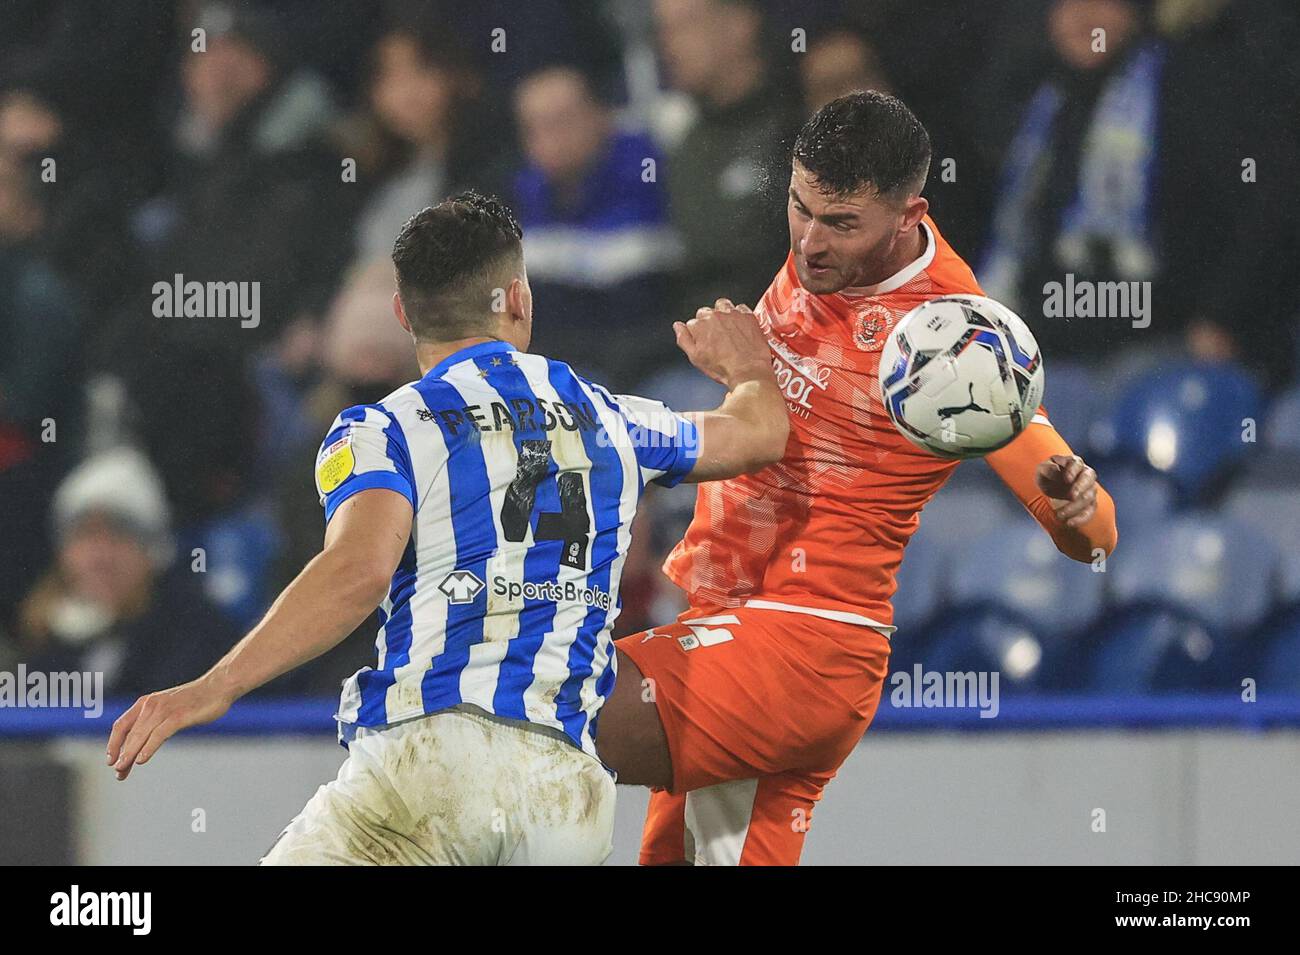 Gary Madine #14 of Blackpool wins the ball from Matty Pearson #4 of Huddersfield Town  in Huddersfield, United Kingdom on 12/26/2021. (Photo by Mark Cosgrove/News Images/Sipa USA) Stock Photo